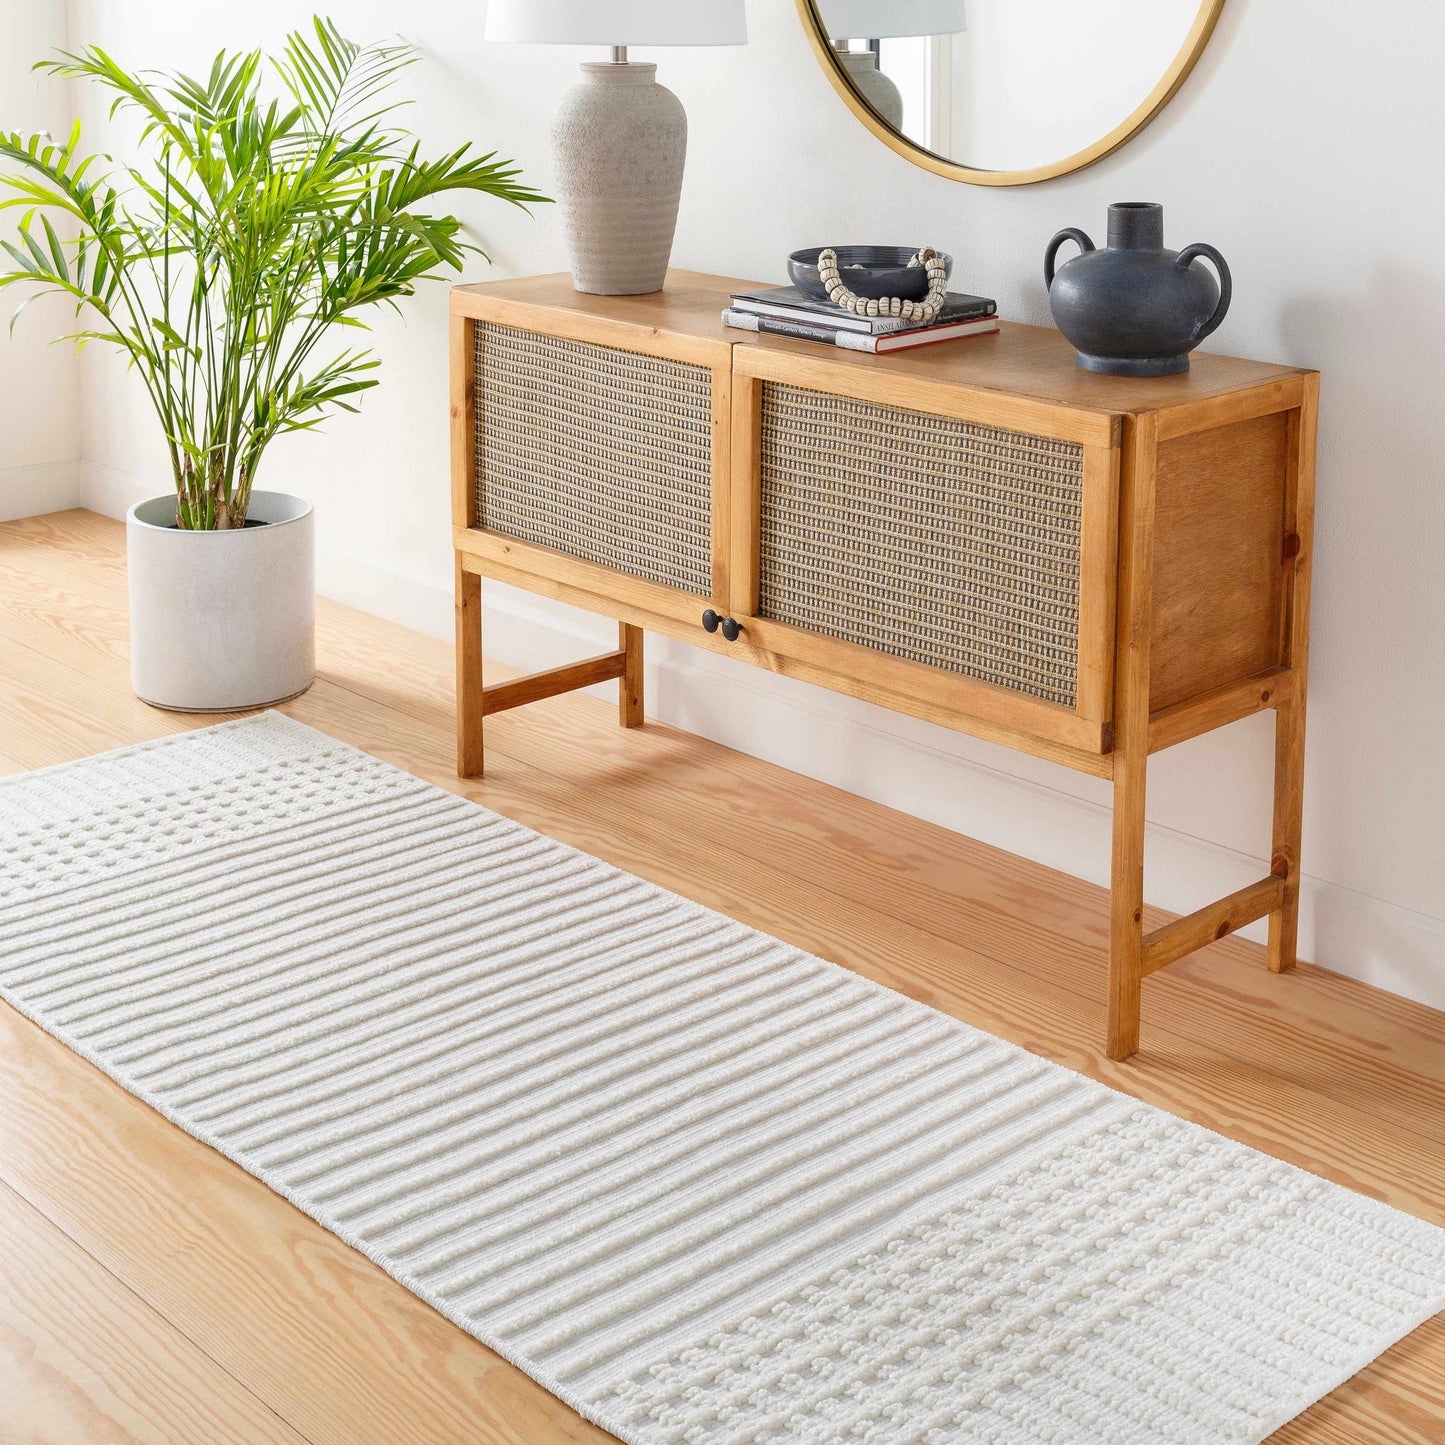 Boutique Rugs Rugs Rhun Washable Area Rug